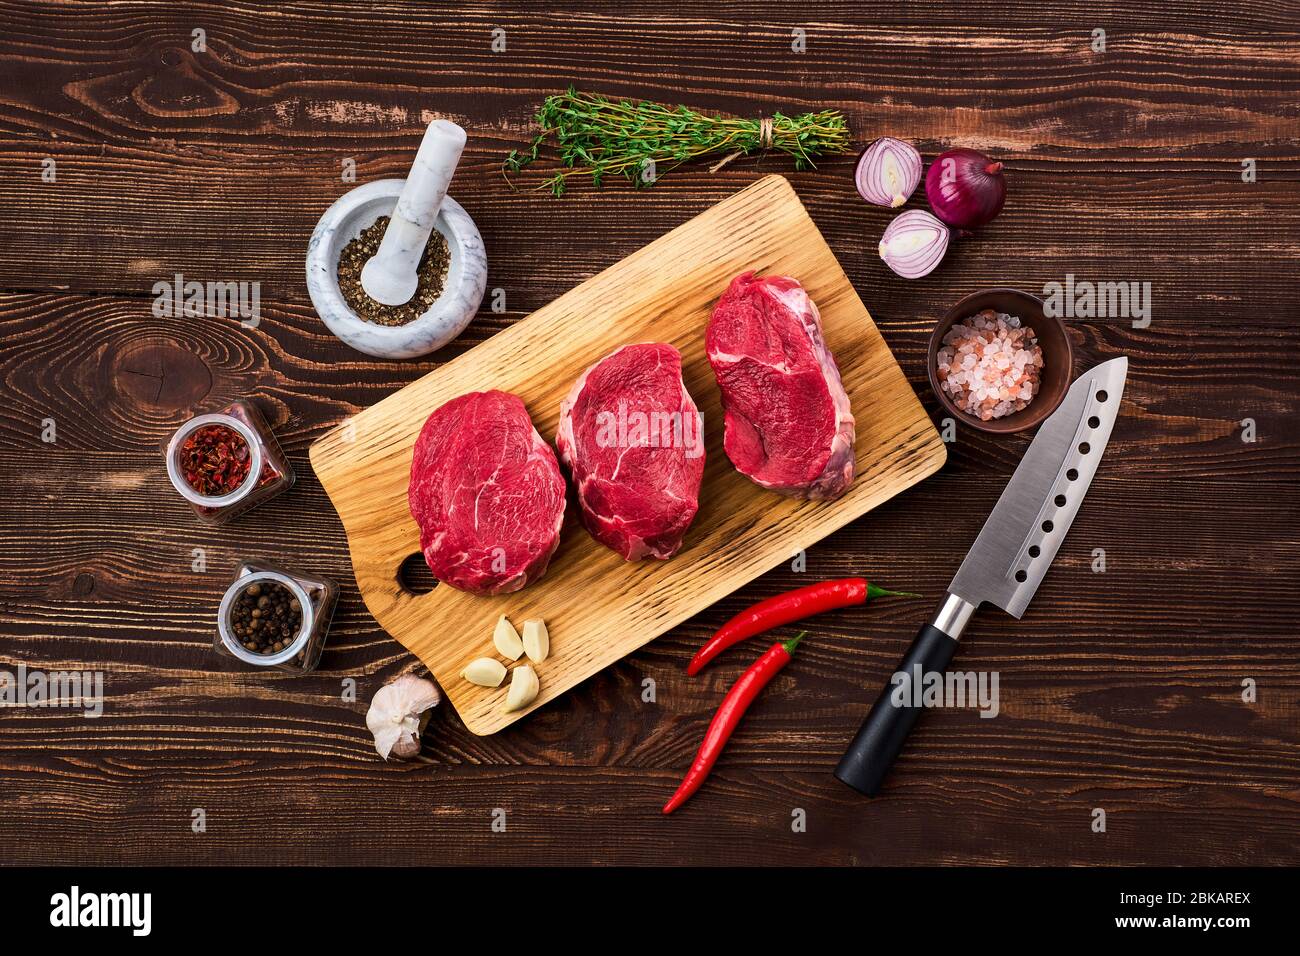 Top view of marinated beef fillet mignon with spice on wooden table Stock Photo